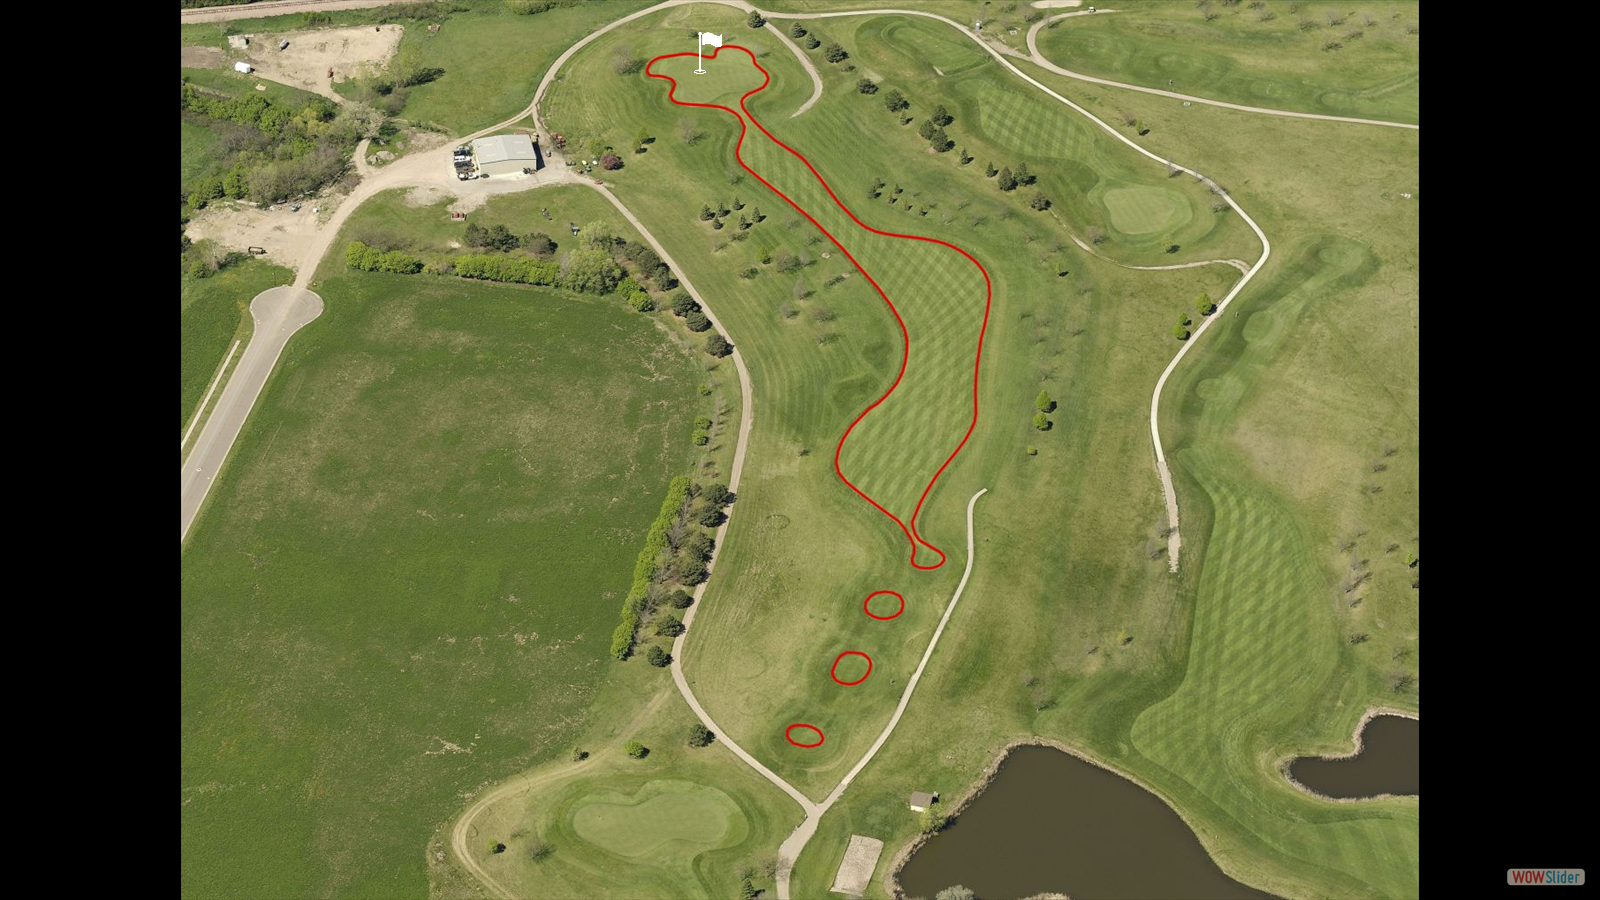 Hole 2: Overview